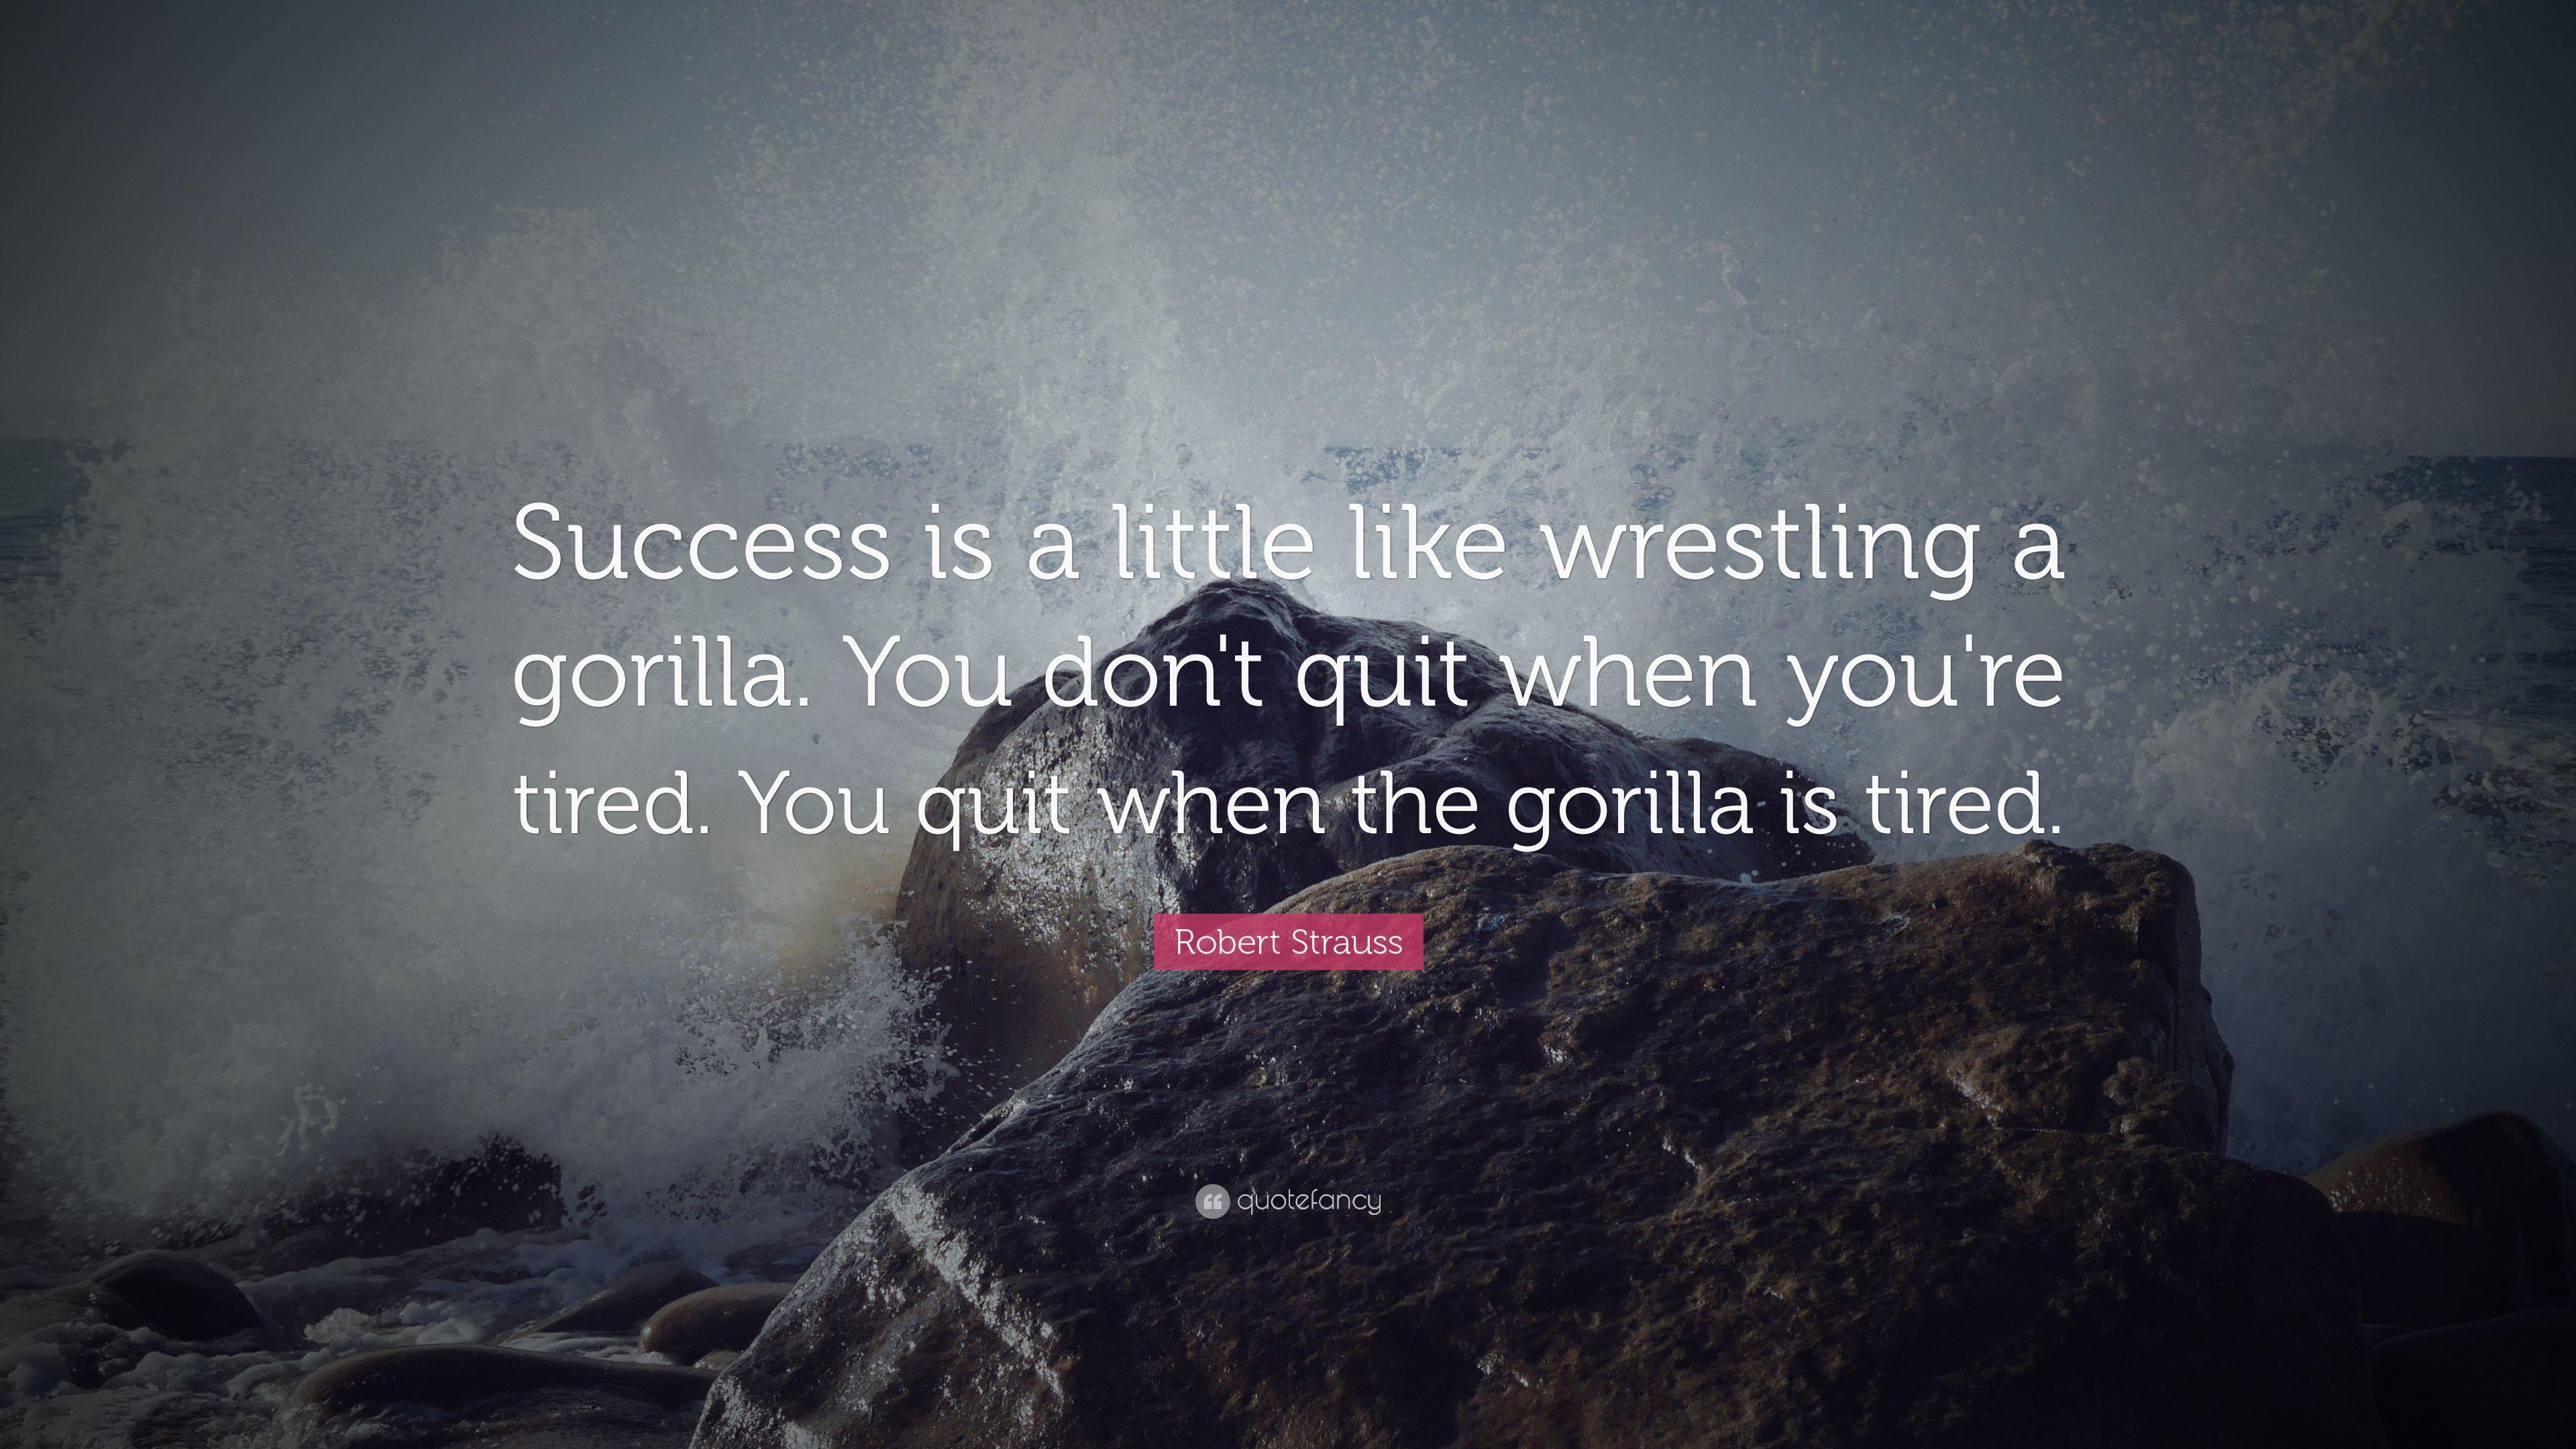 Robert Strauss Quote: “Success is a little like wrestling a